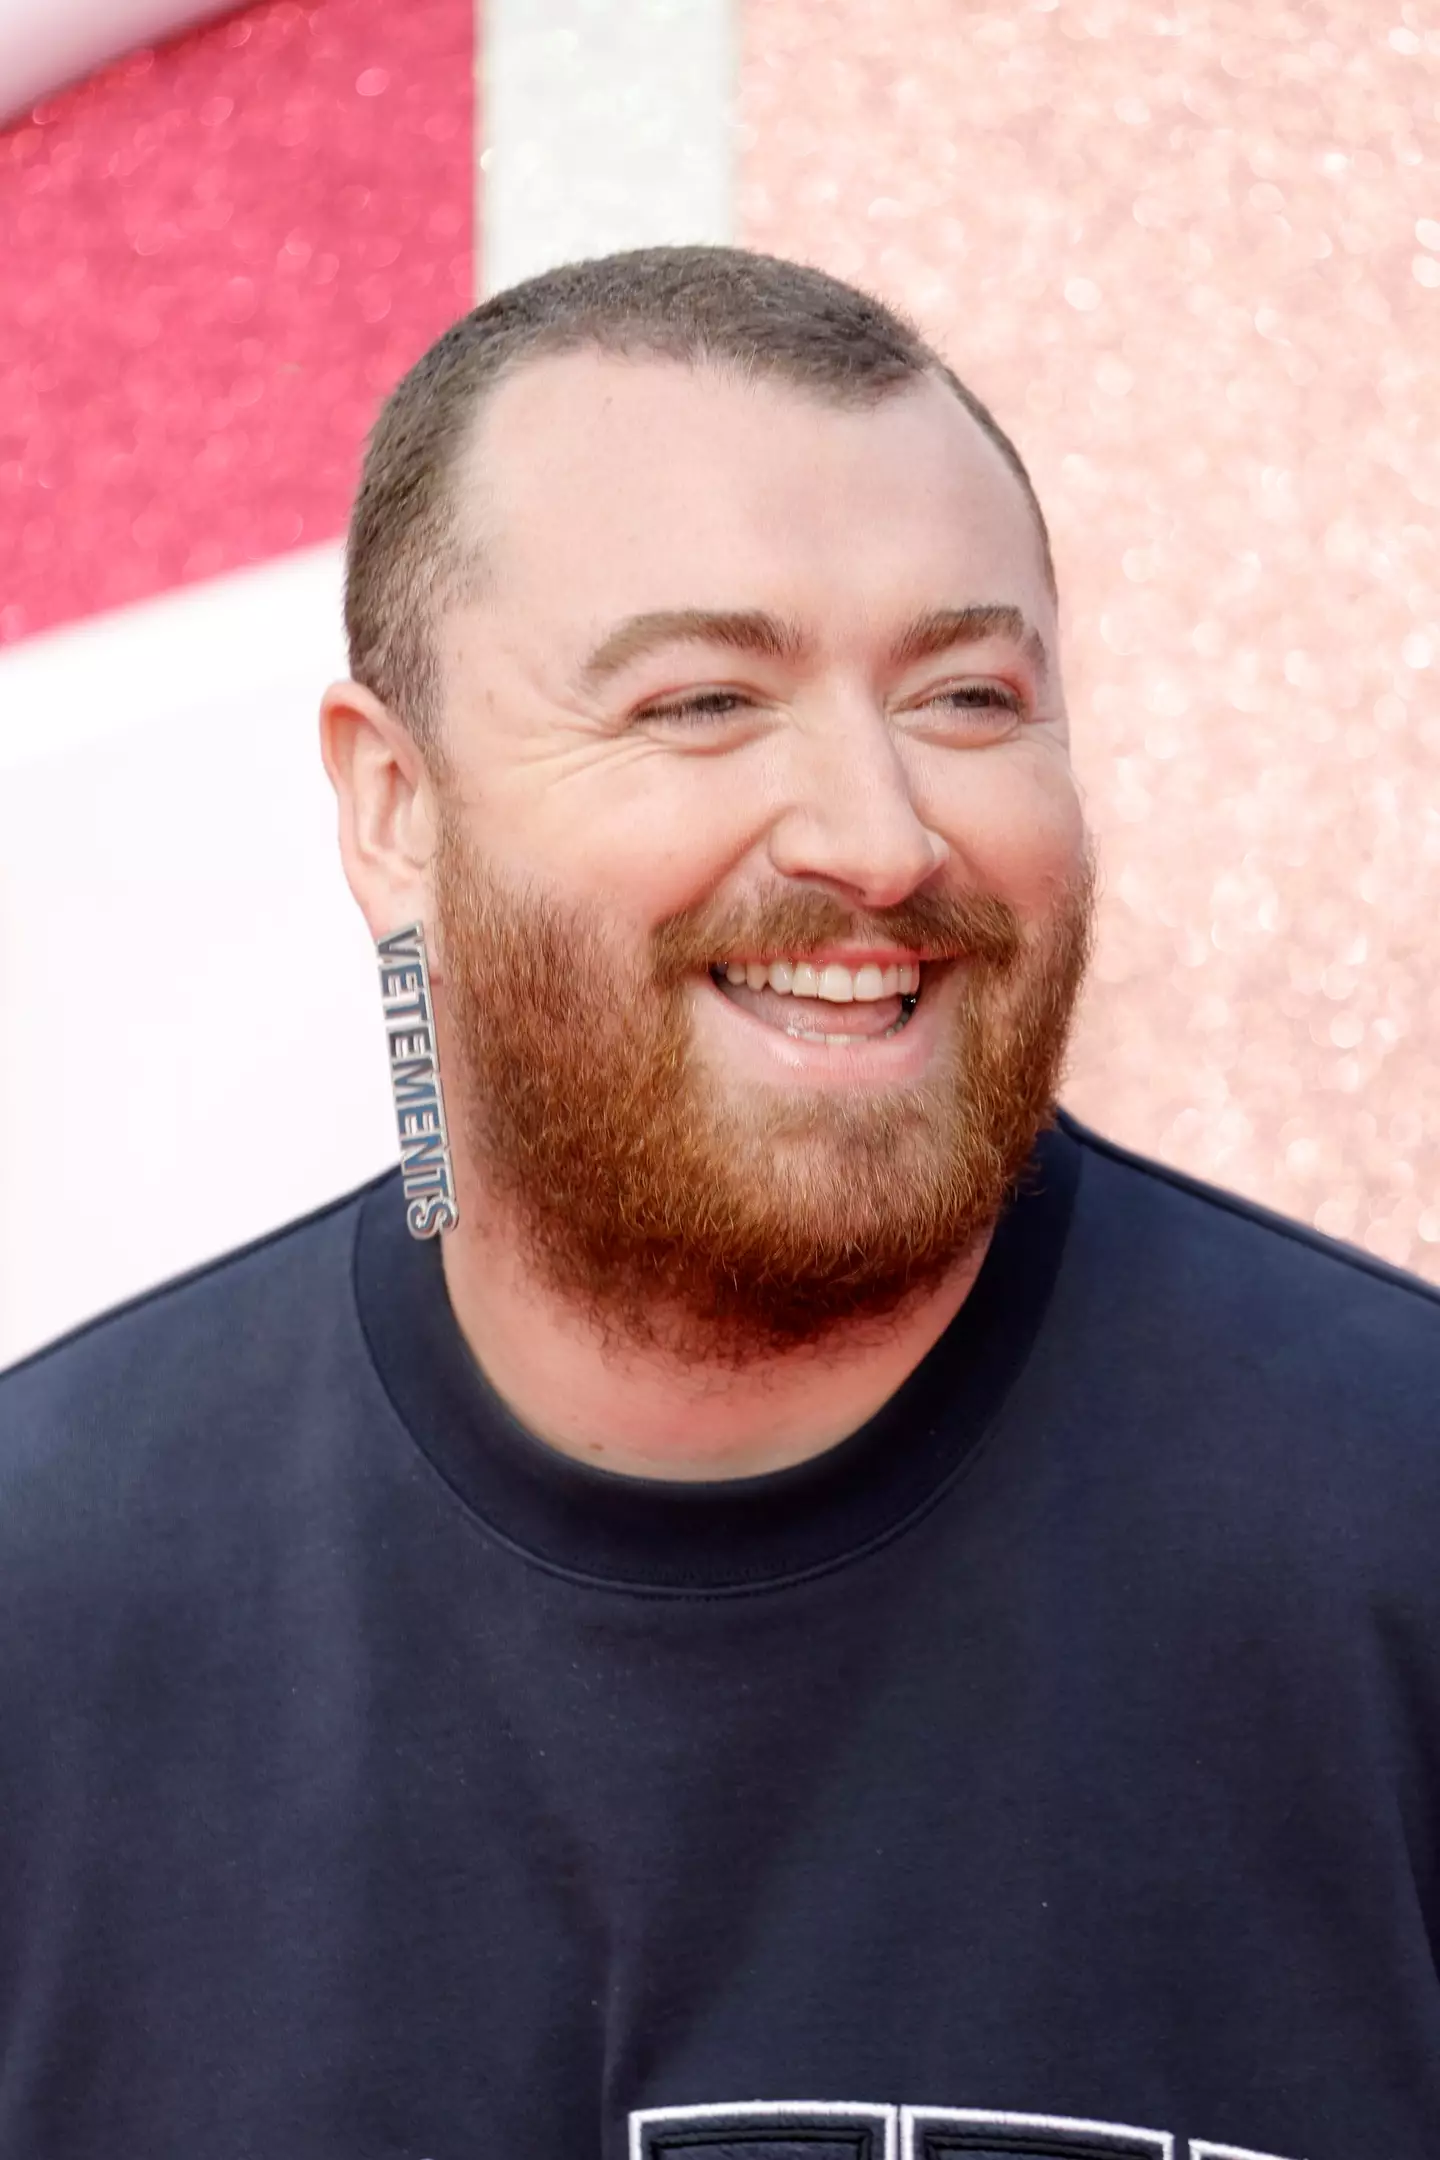 Sam Smith appeared on the pink carpet last night.